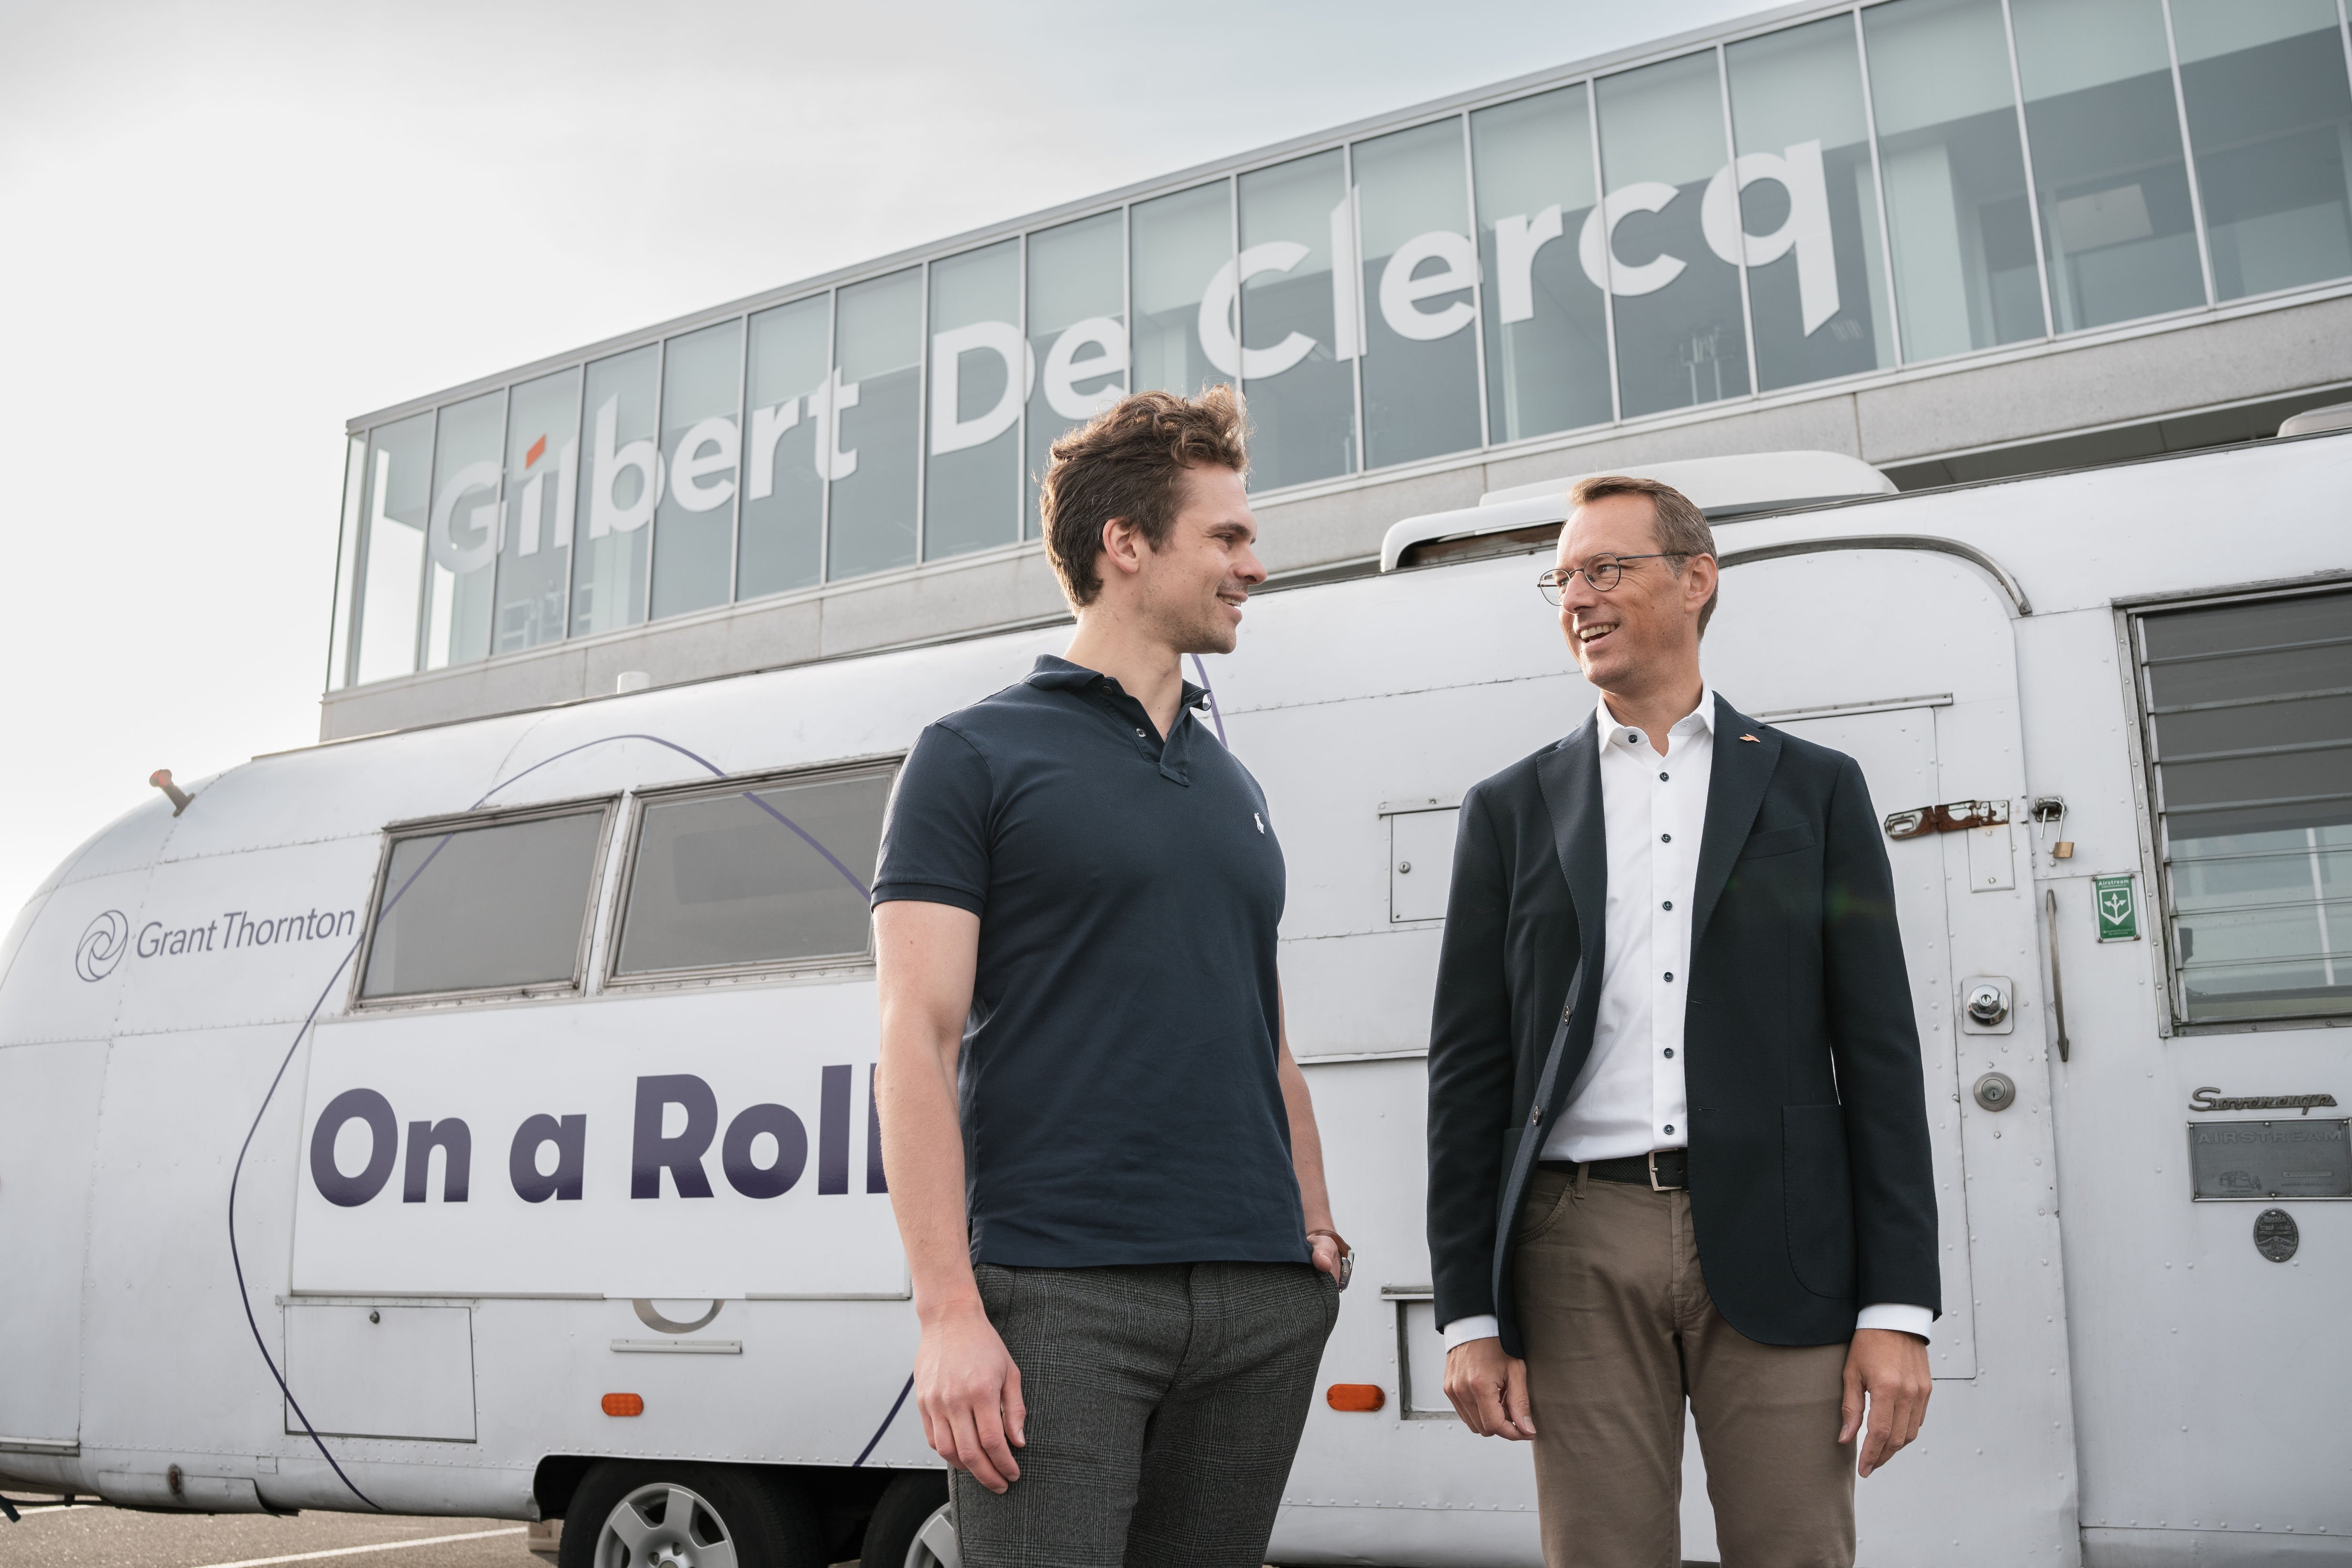 How Filip took charge of family business Gilbert De Clercq